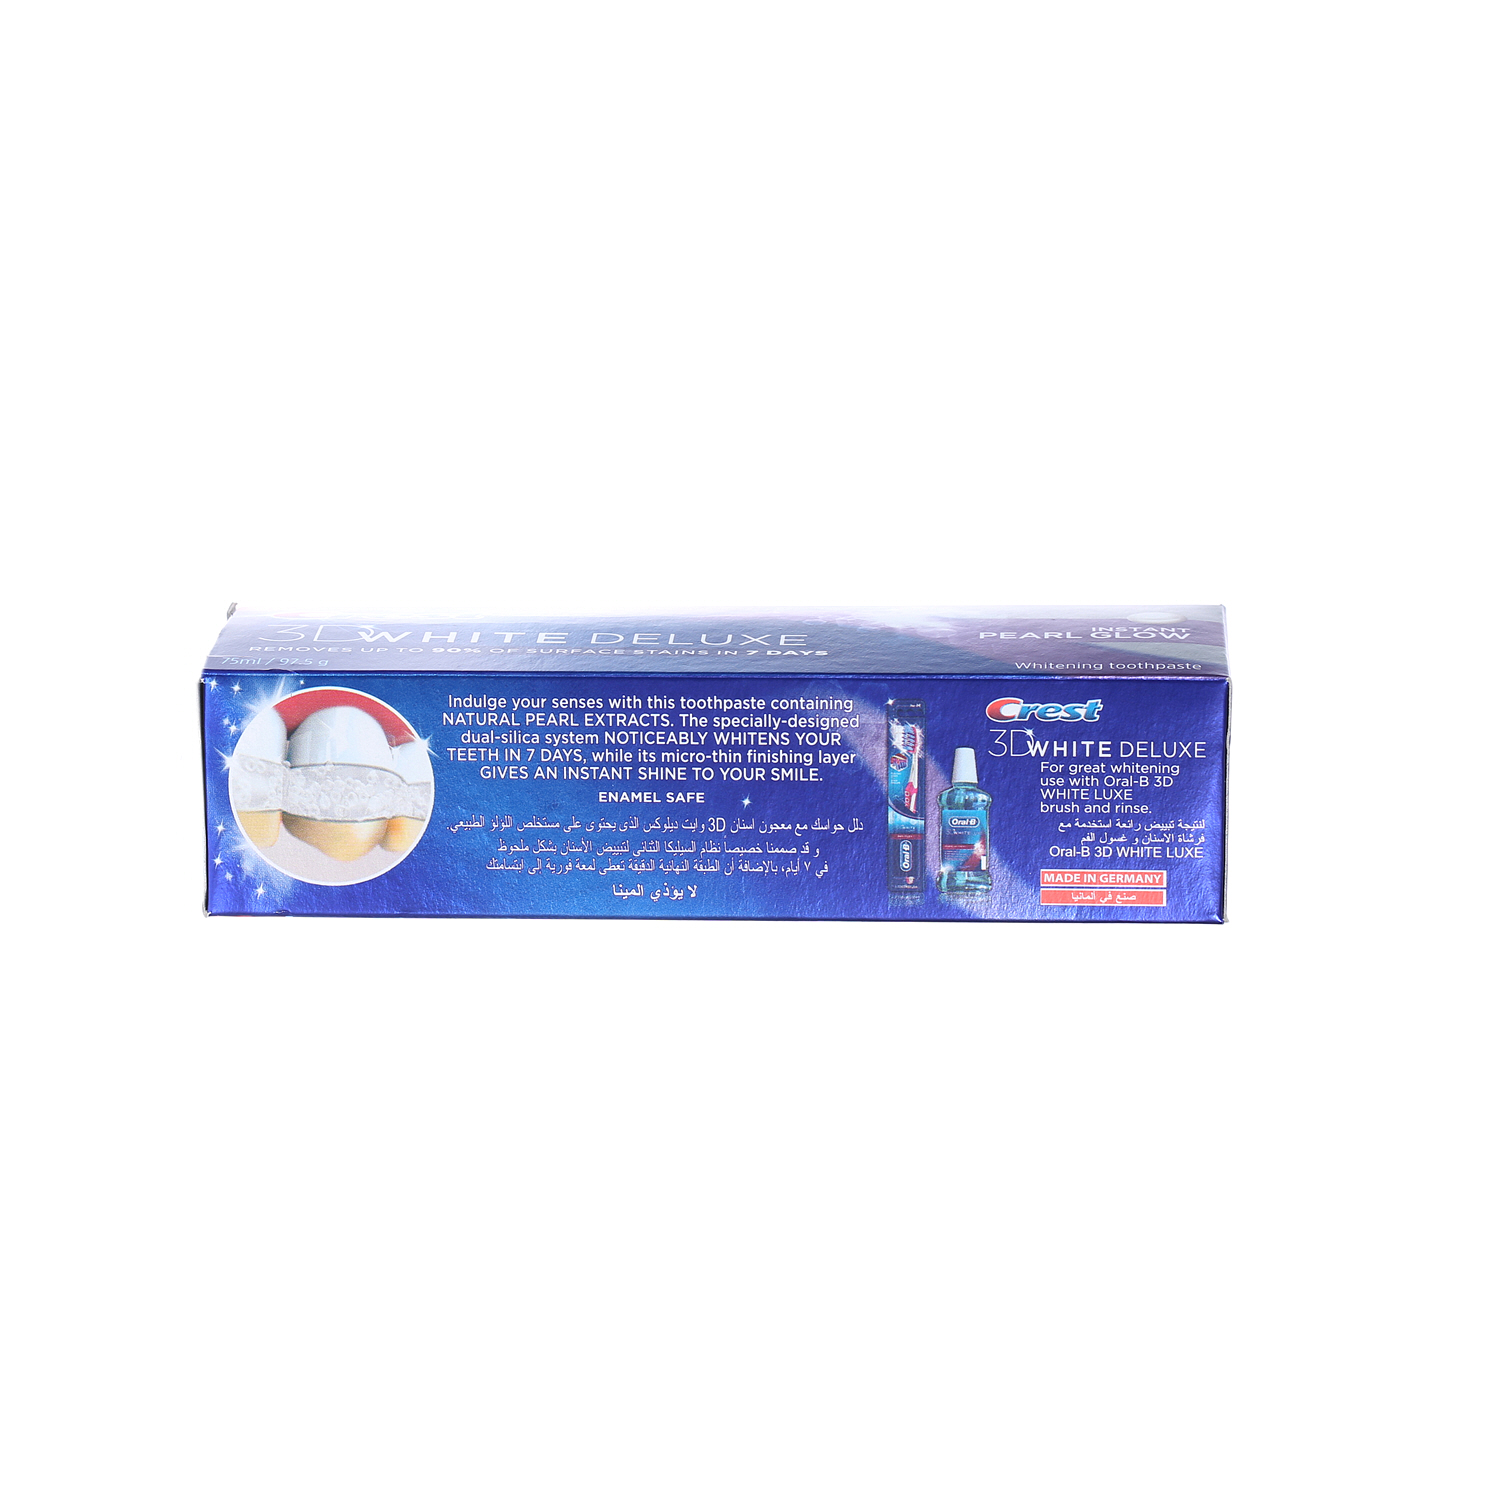 Crest Toothpaste 3D White Peral Glow 75ml